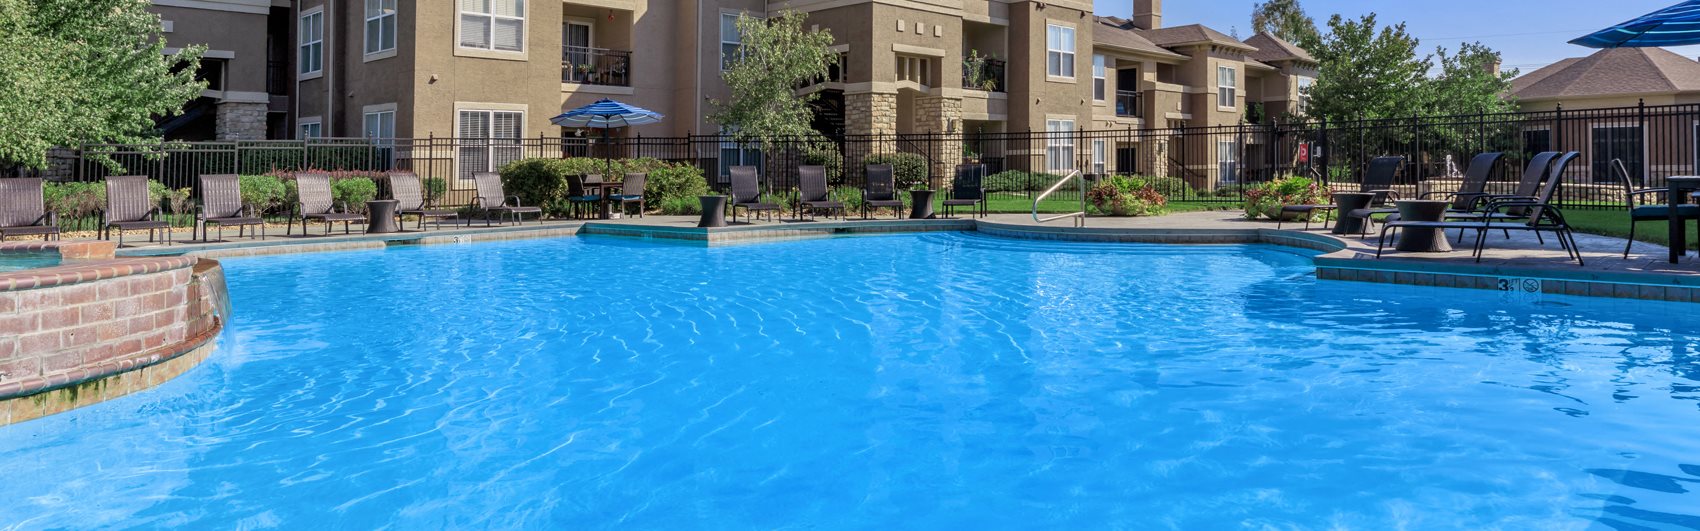 Pool with apartment in background at Stonepost Lakeside, Olathe, KS, 66062